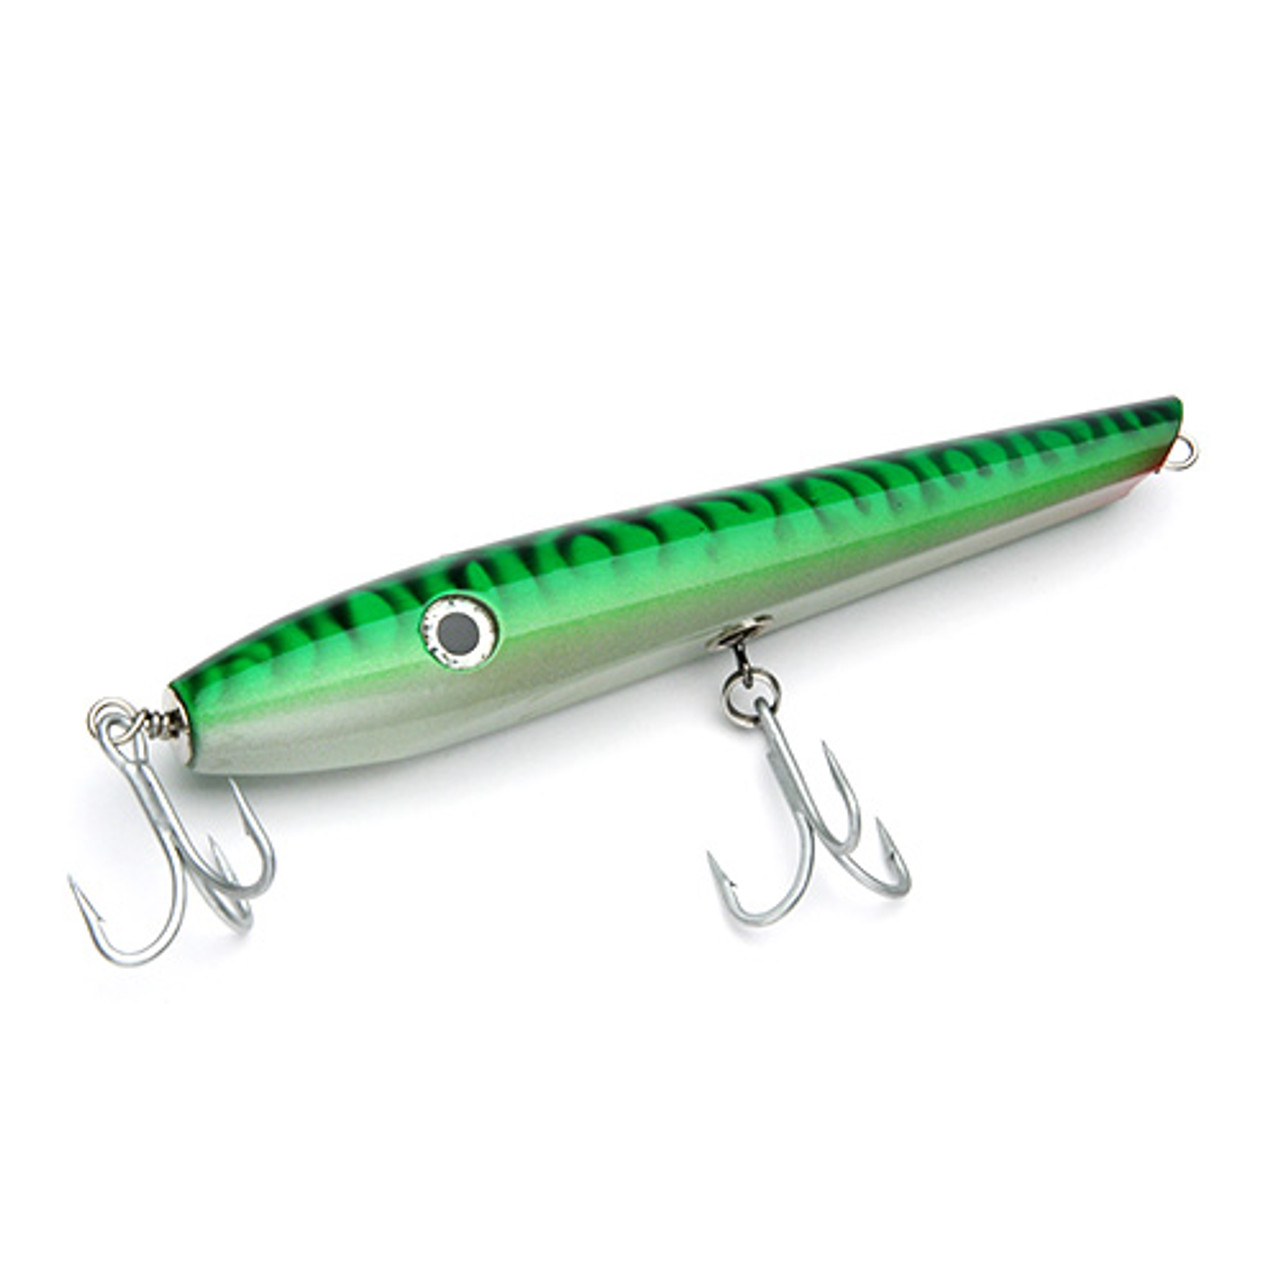 Offshore Angler Lazer Eye Saltwater Series Pencil Popper - 6.5 - Red/Chartreuse